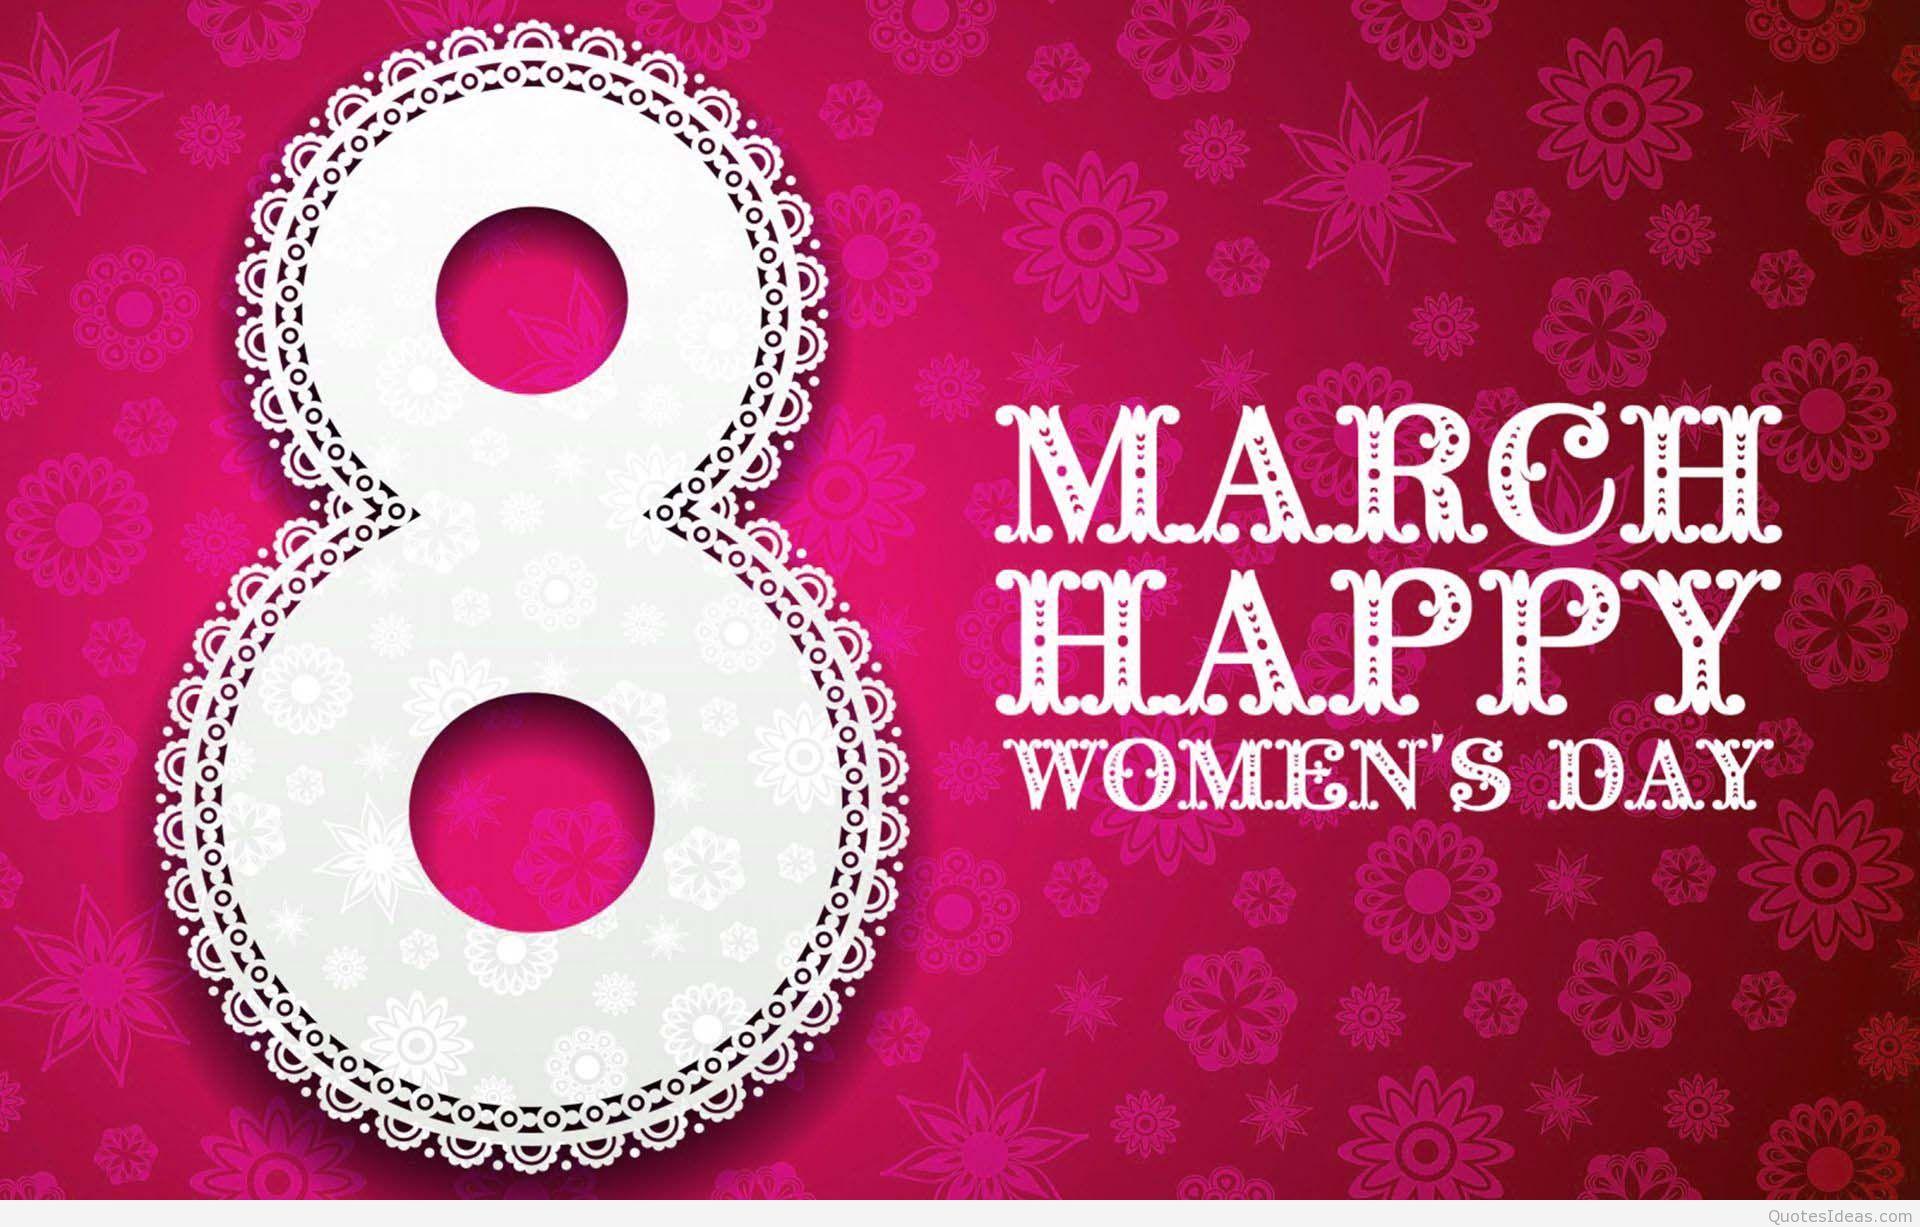 Happy Womens Day High Definition Wallpaper Download. Women's Day Wallpaper Quotes 2015 2016's Day Wallpaper